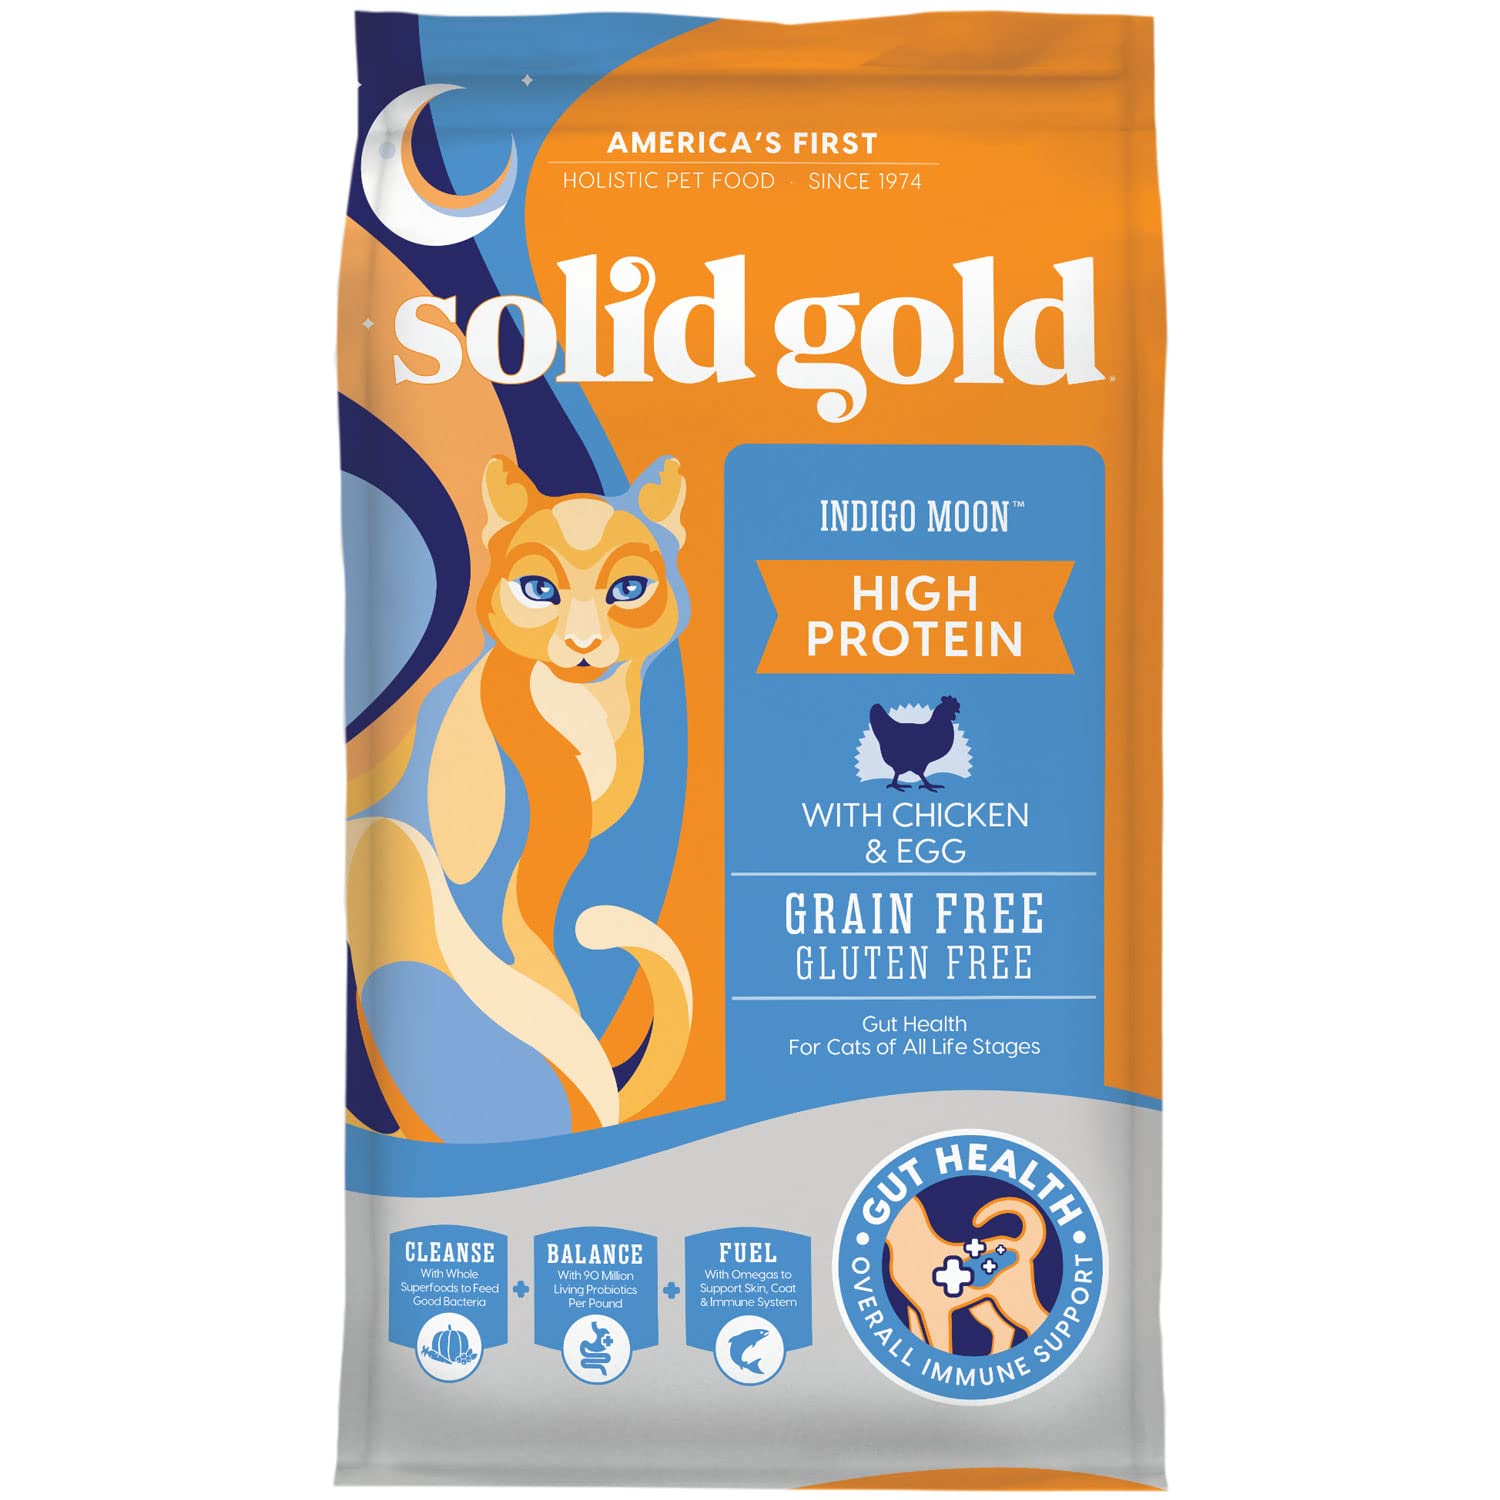 Is Solid Gold a Good Cat Food?